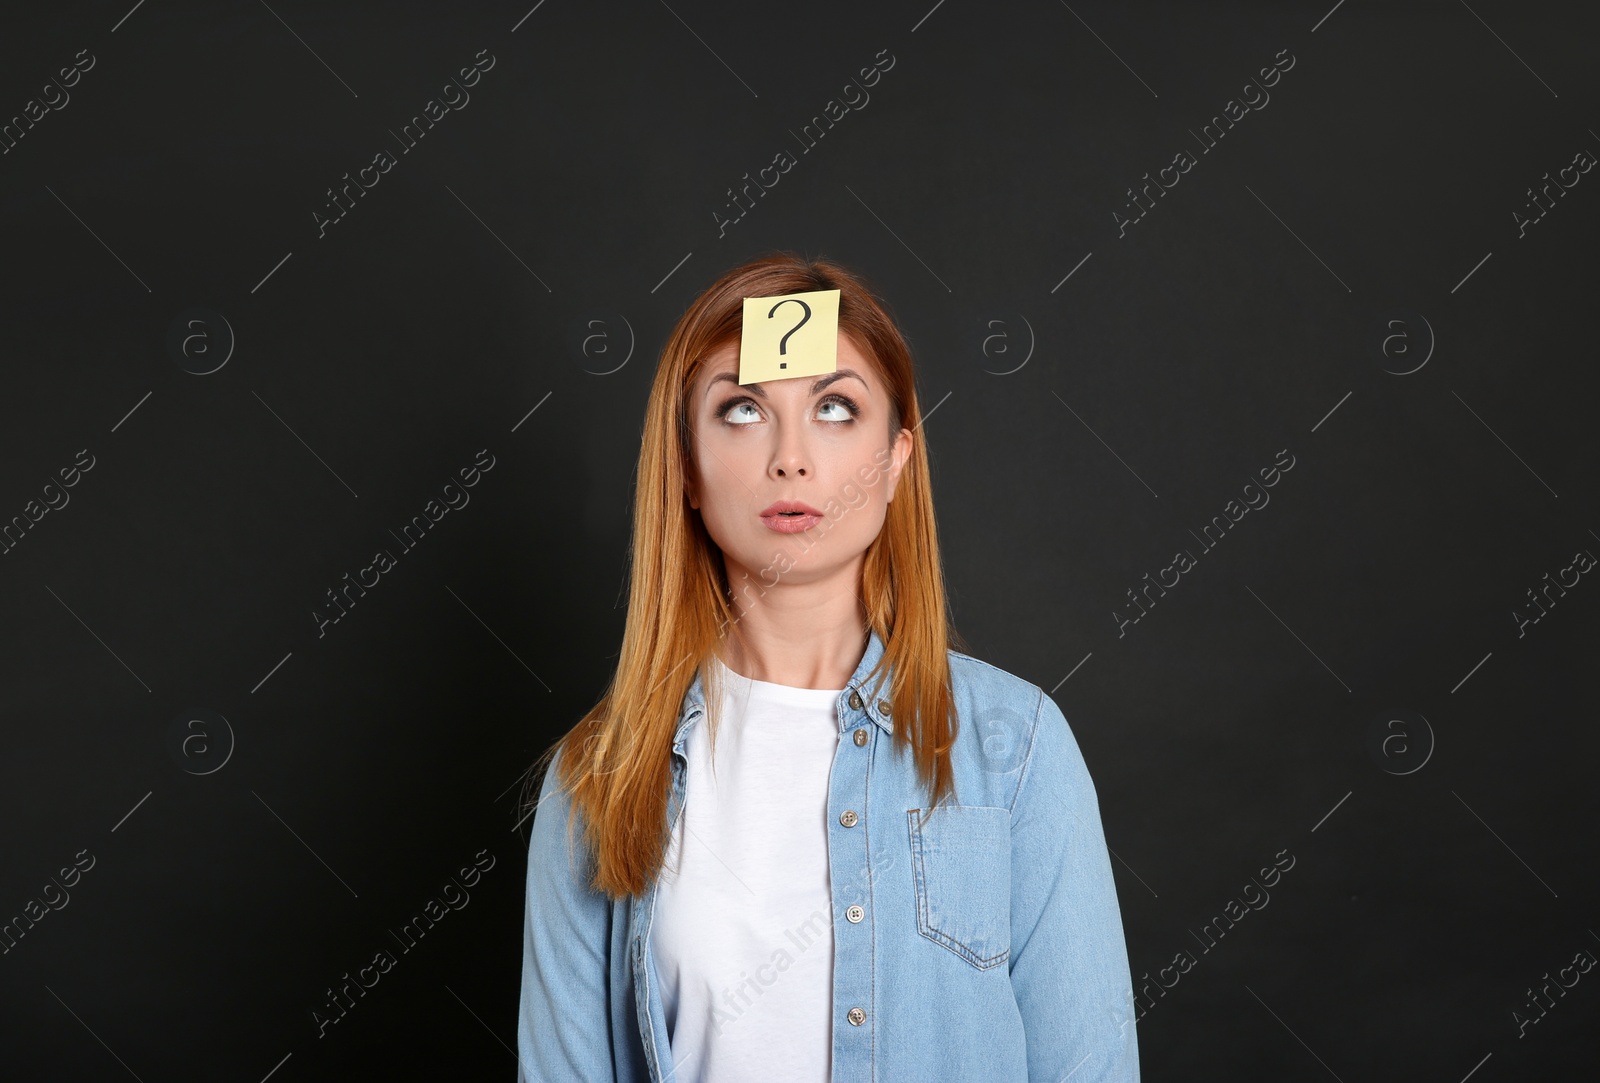 Photo of Emotional woman with question mark sticker on forehead against black background